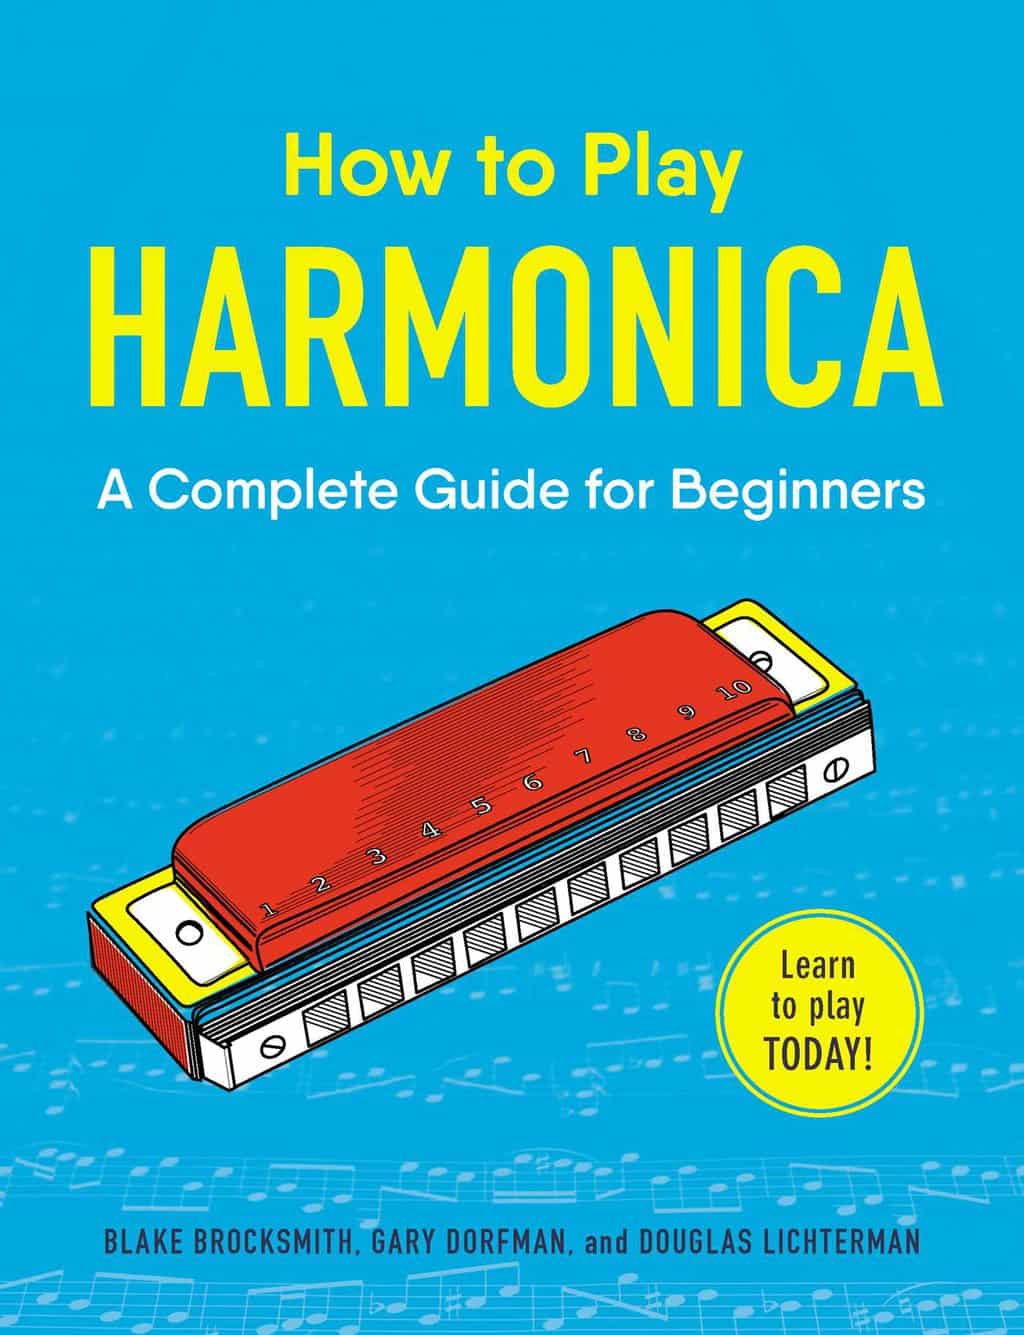 Basic Harmonica Playing Techniques